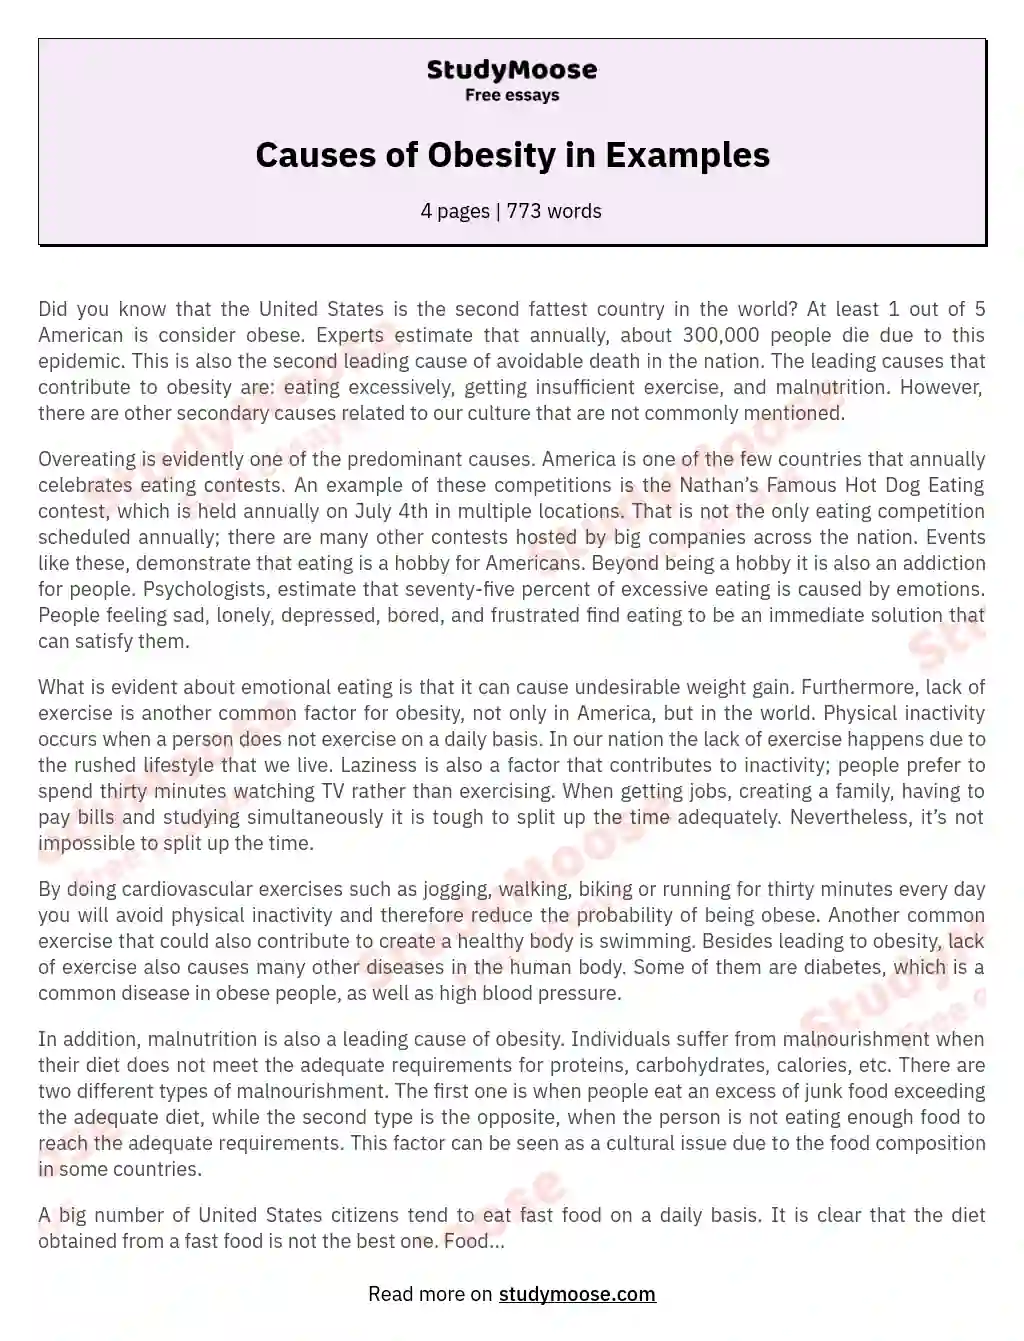 Causes of Obesity in Examples essay